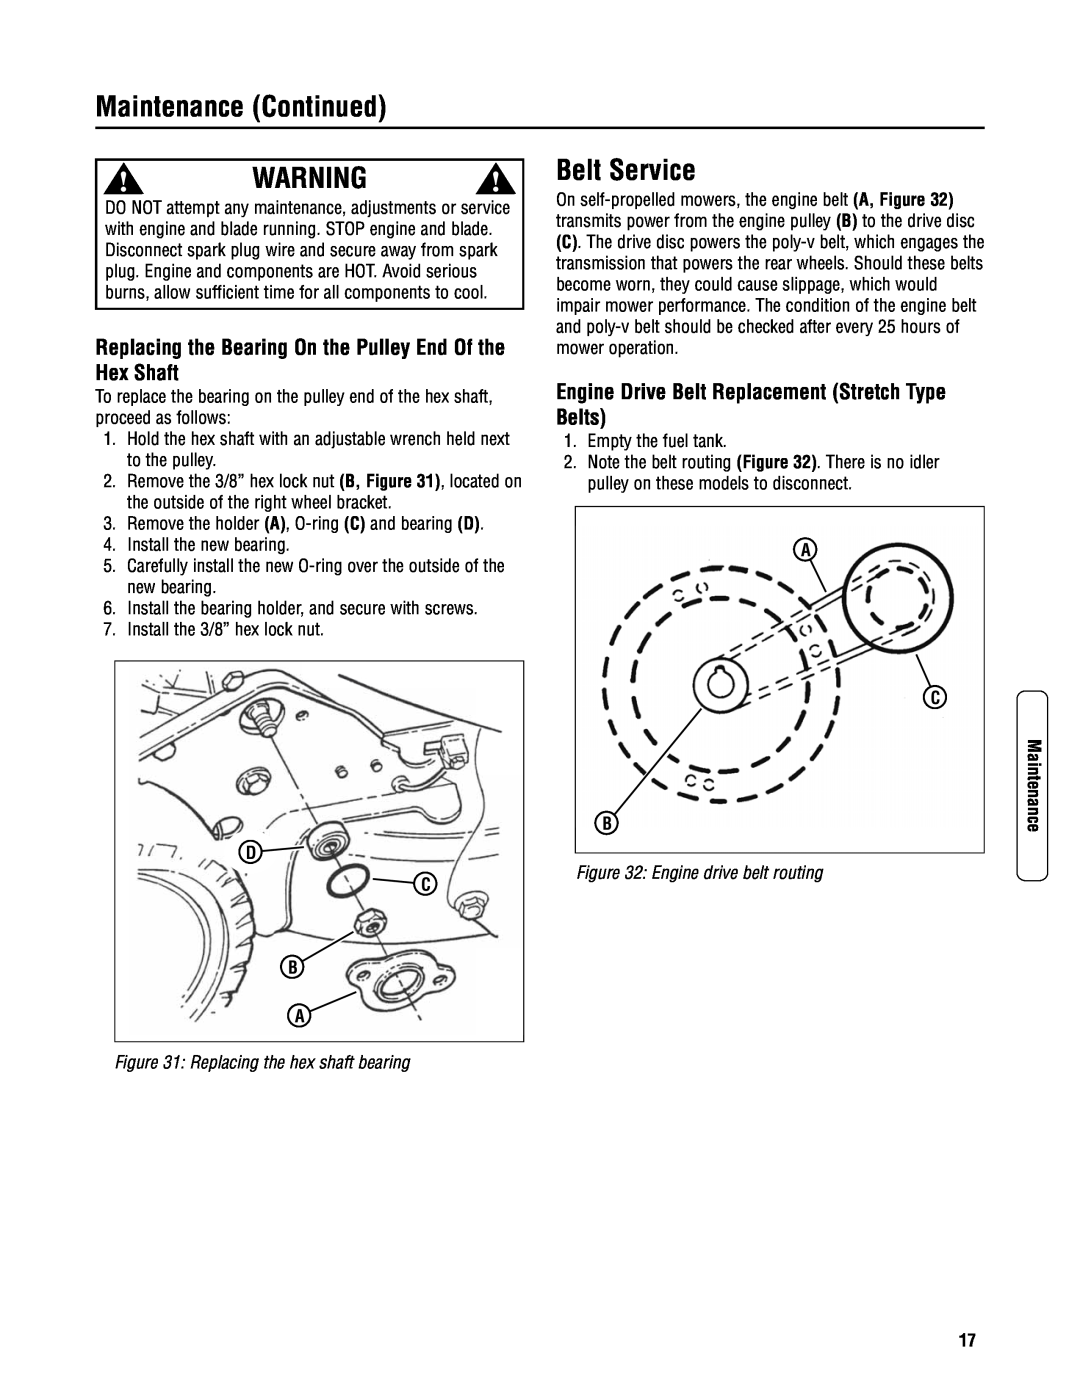 Snapper RP217020BDV (7800424) Belt Service, Replacing the Bearing On the Pulley End Of the Hex Shaft, Maintenance 